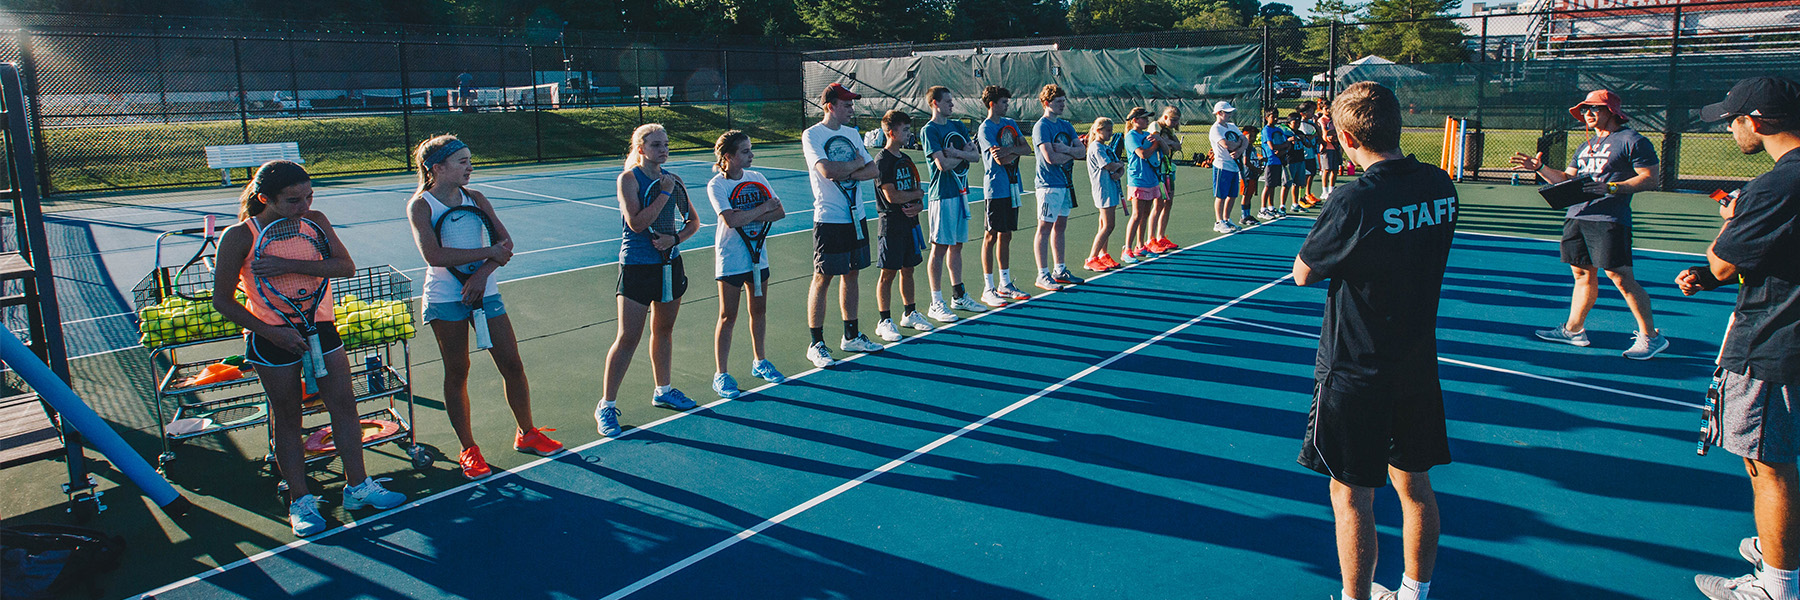 Three tennis instructors address a large group of junior players on an outdoor tennis court.